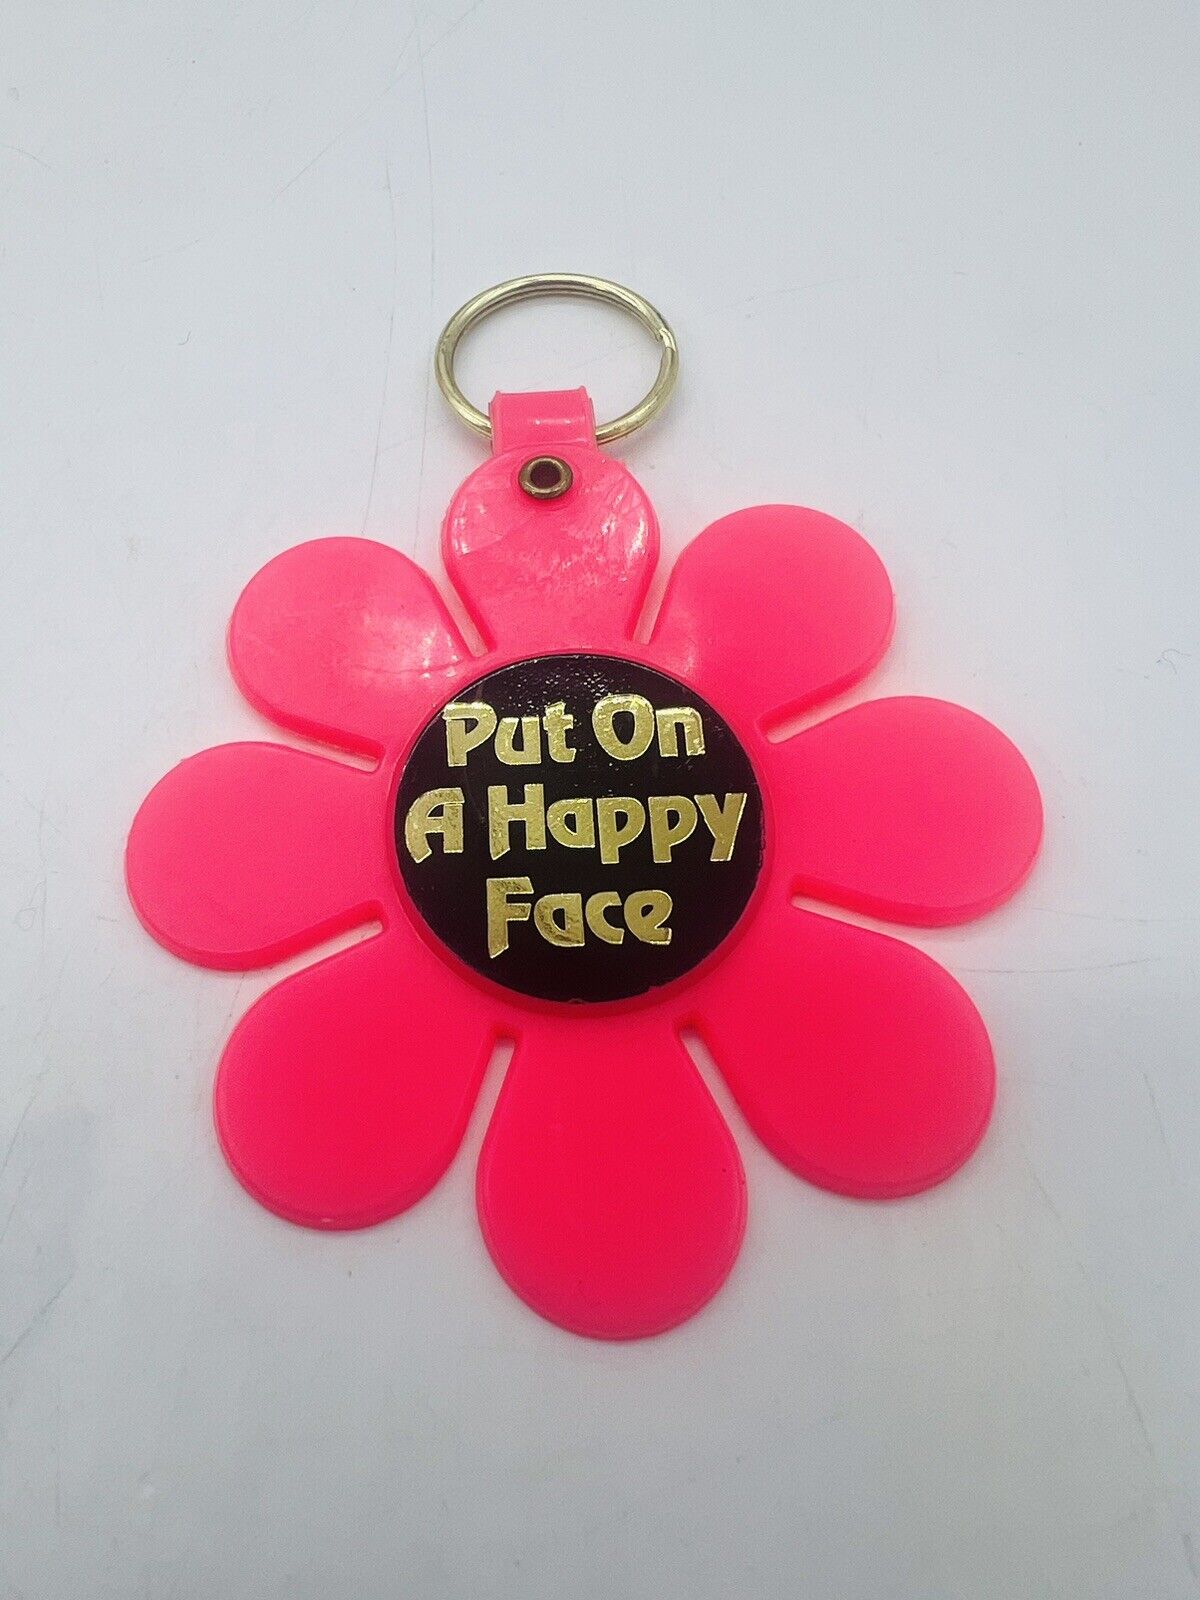 Retro 60s 70s Flower Power “Put on a Happy Face” Keychain Pink Large